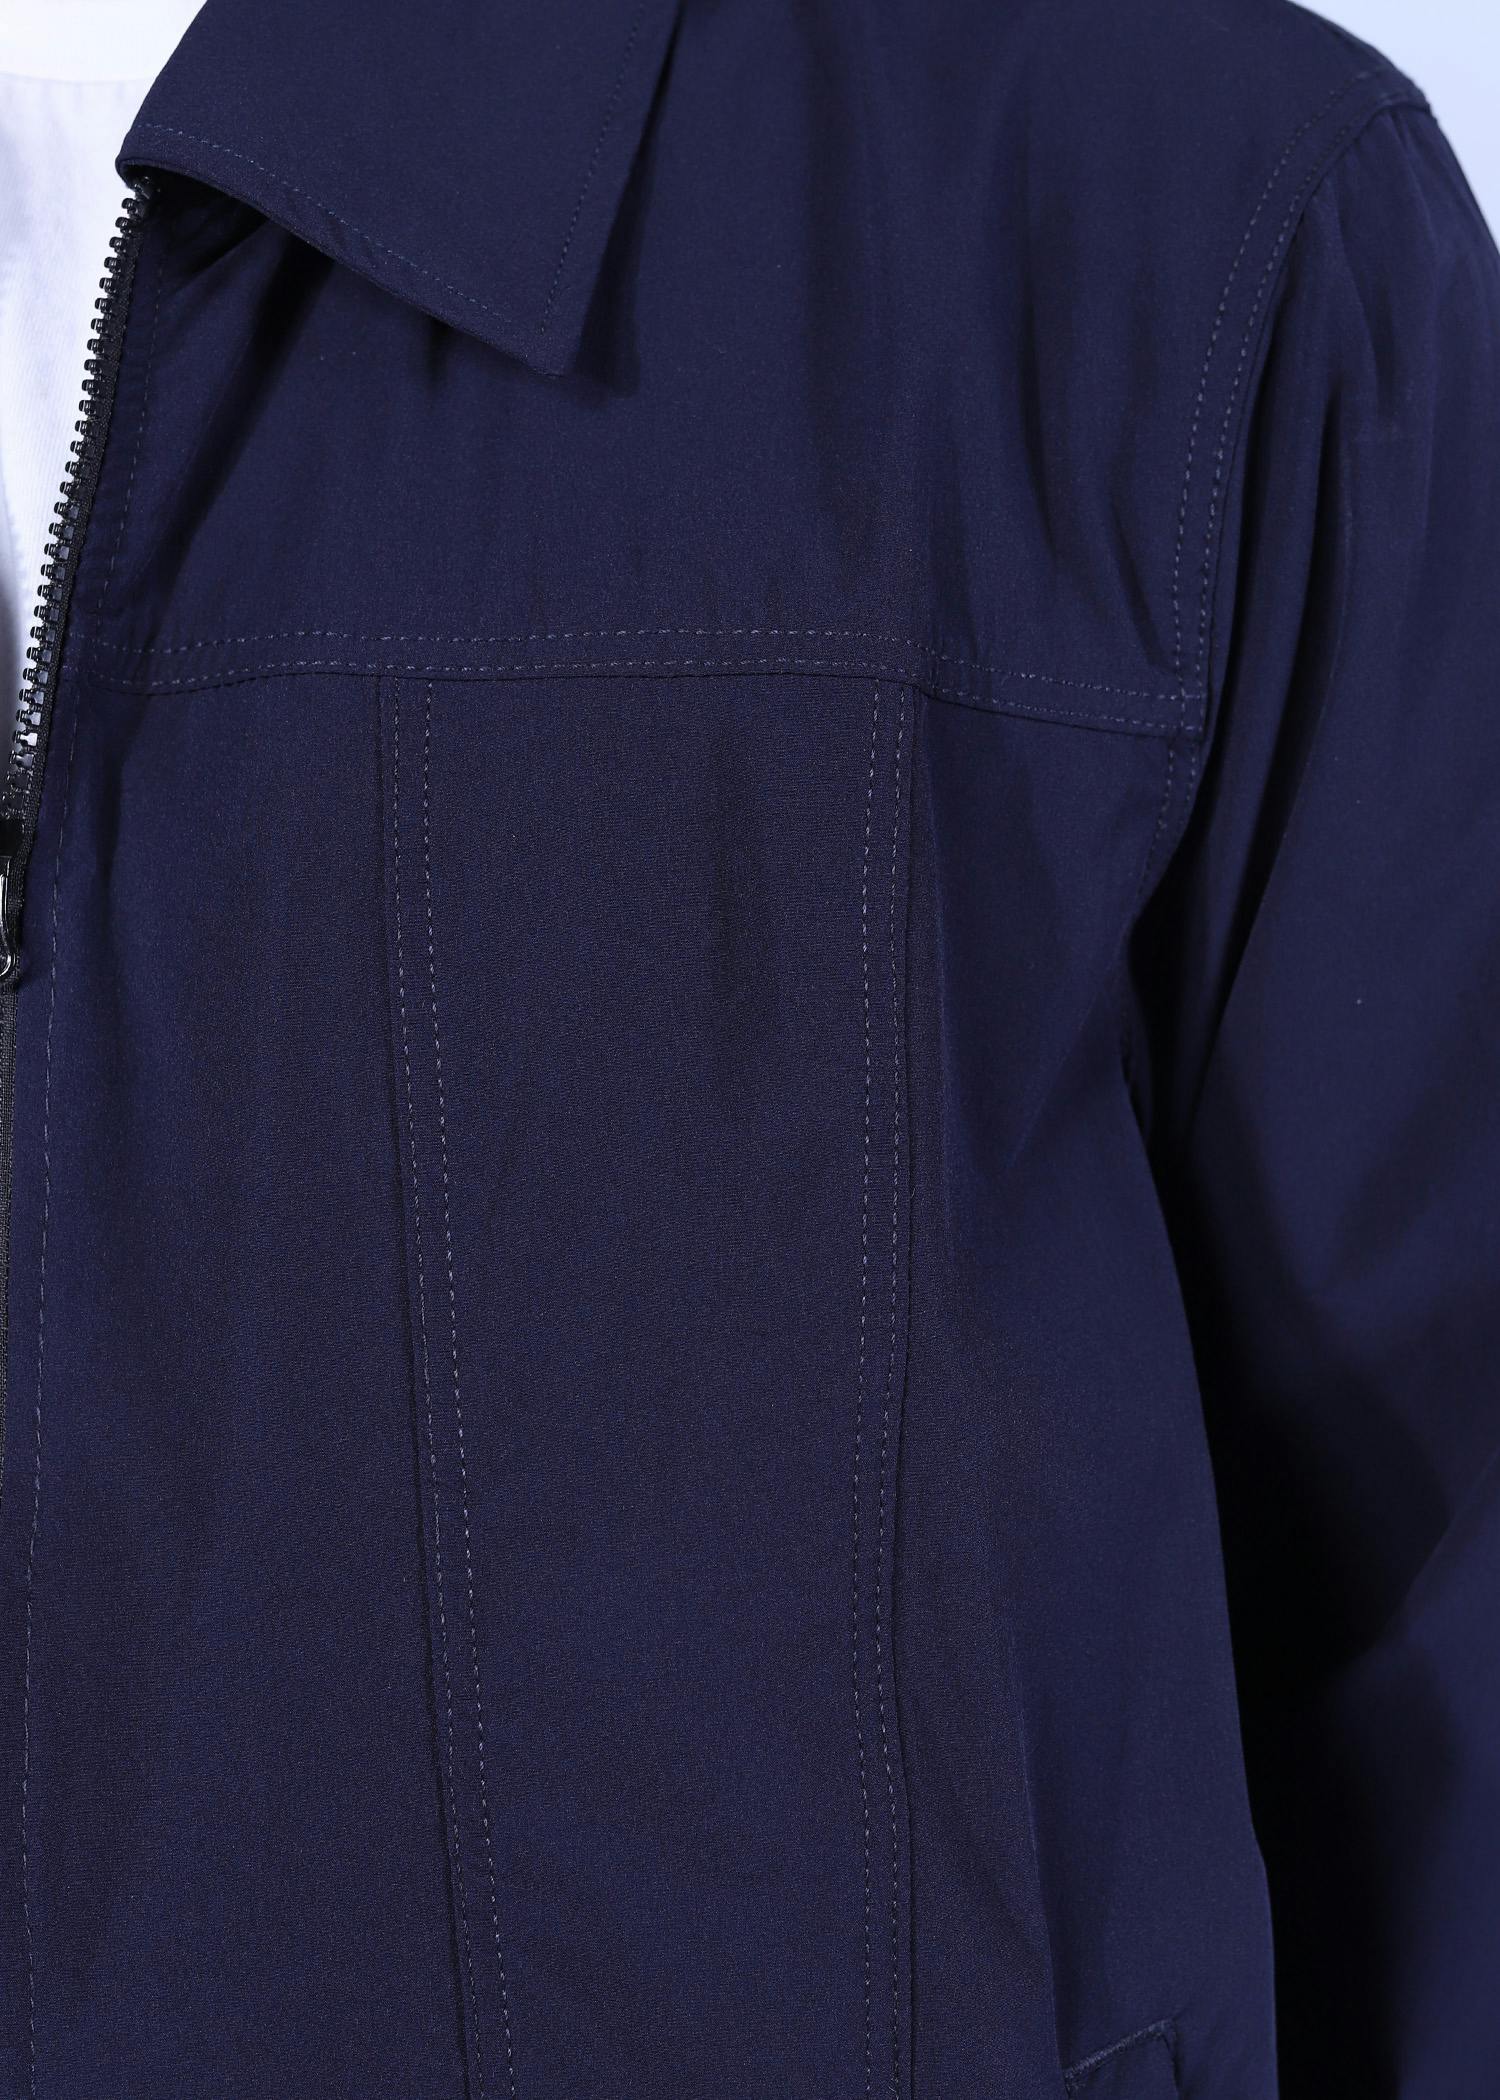 booby ii jacket navy color close front view